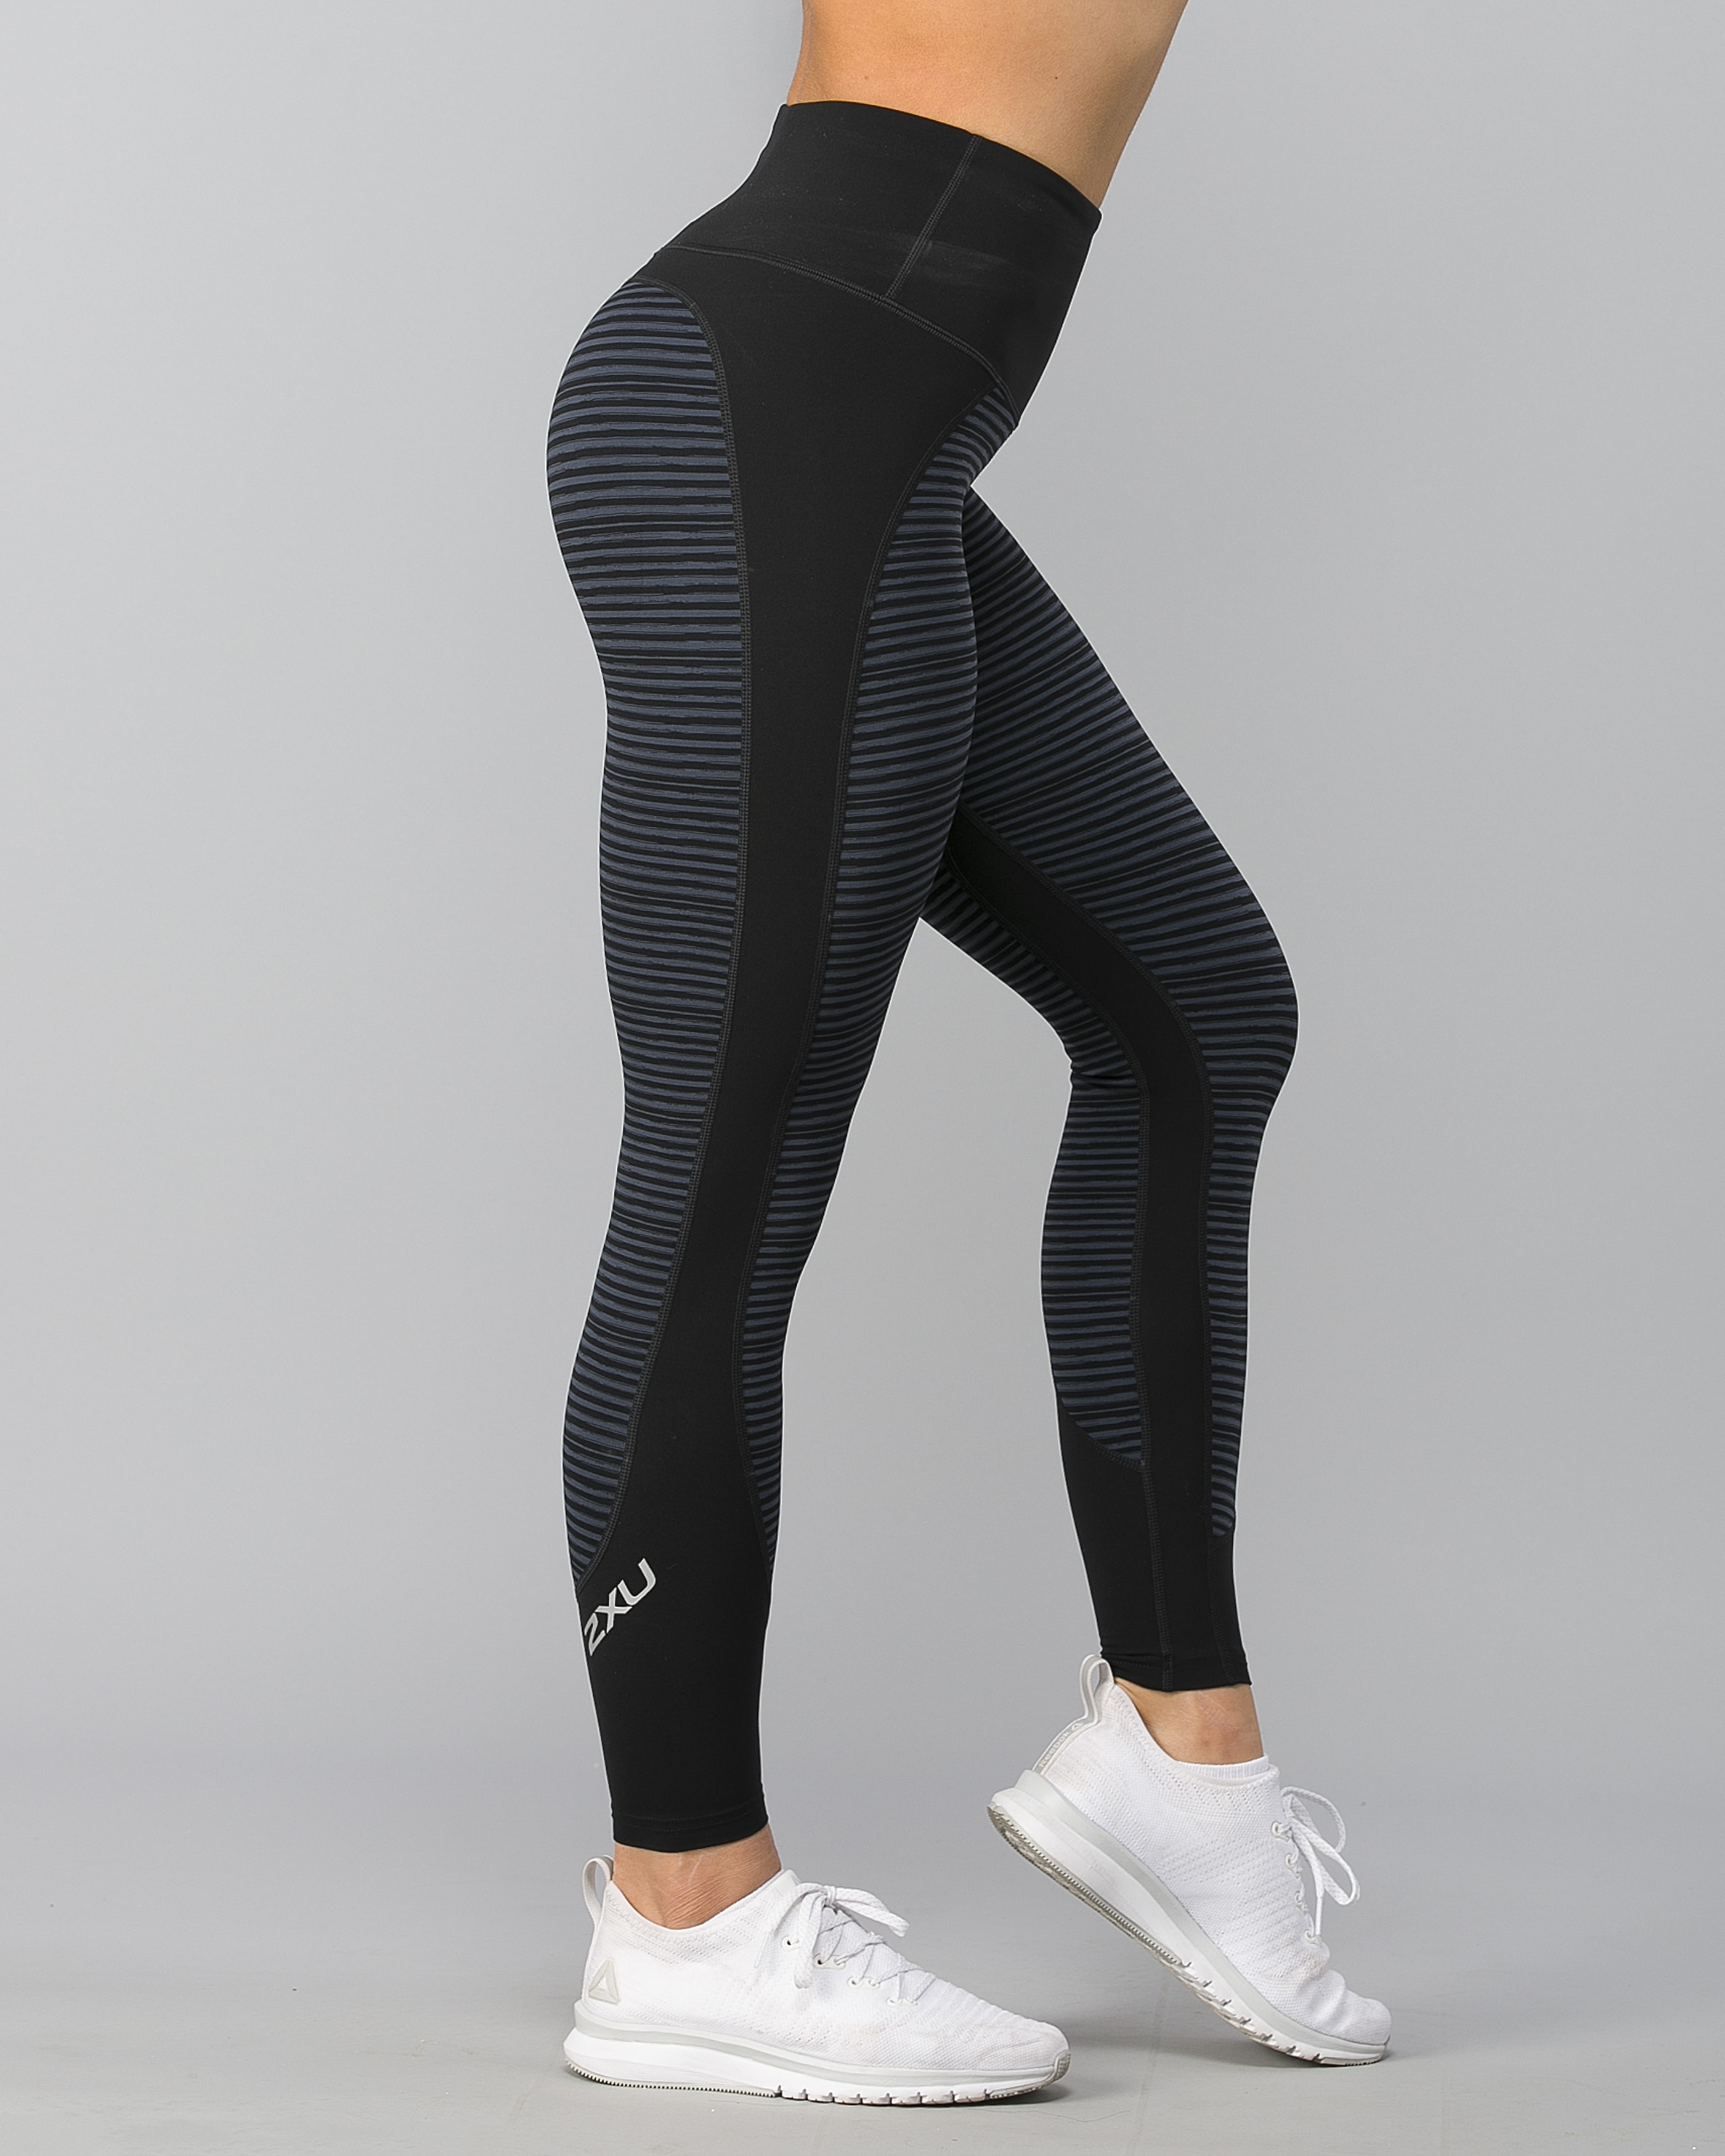 https://www.tights.no/wp-content/uploads/sites/7/2018/10/2XU-Print-Fitness-Hi-Rise-Comp-Tights%E2%80%93Black-Outer-Space-Stripe2.jpg